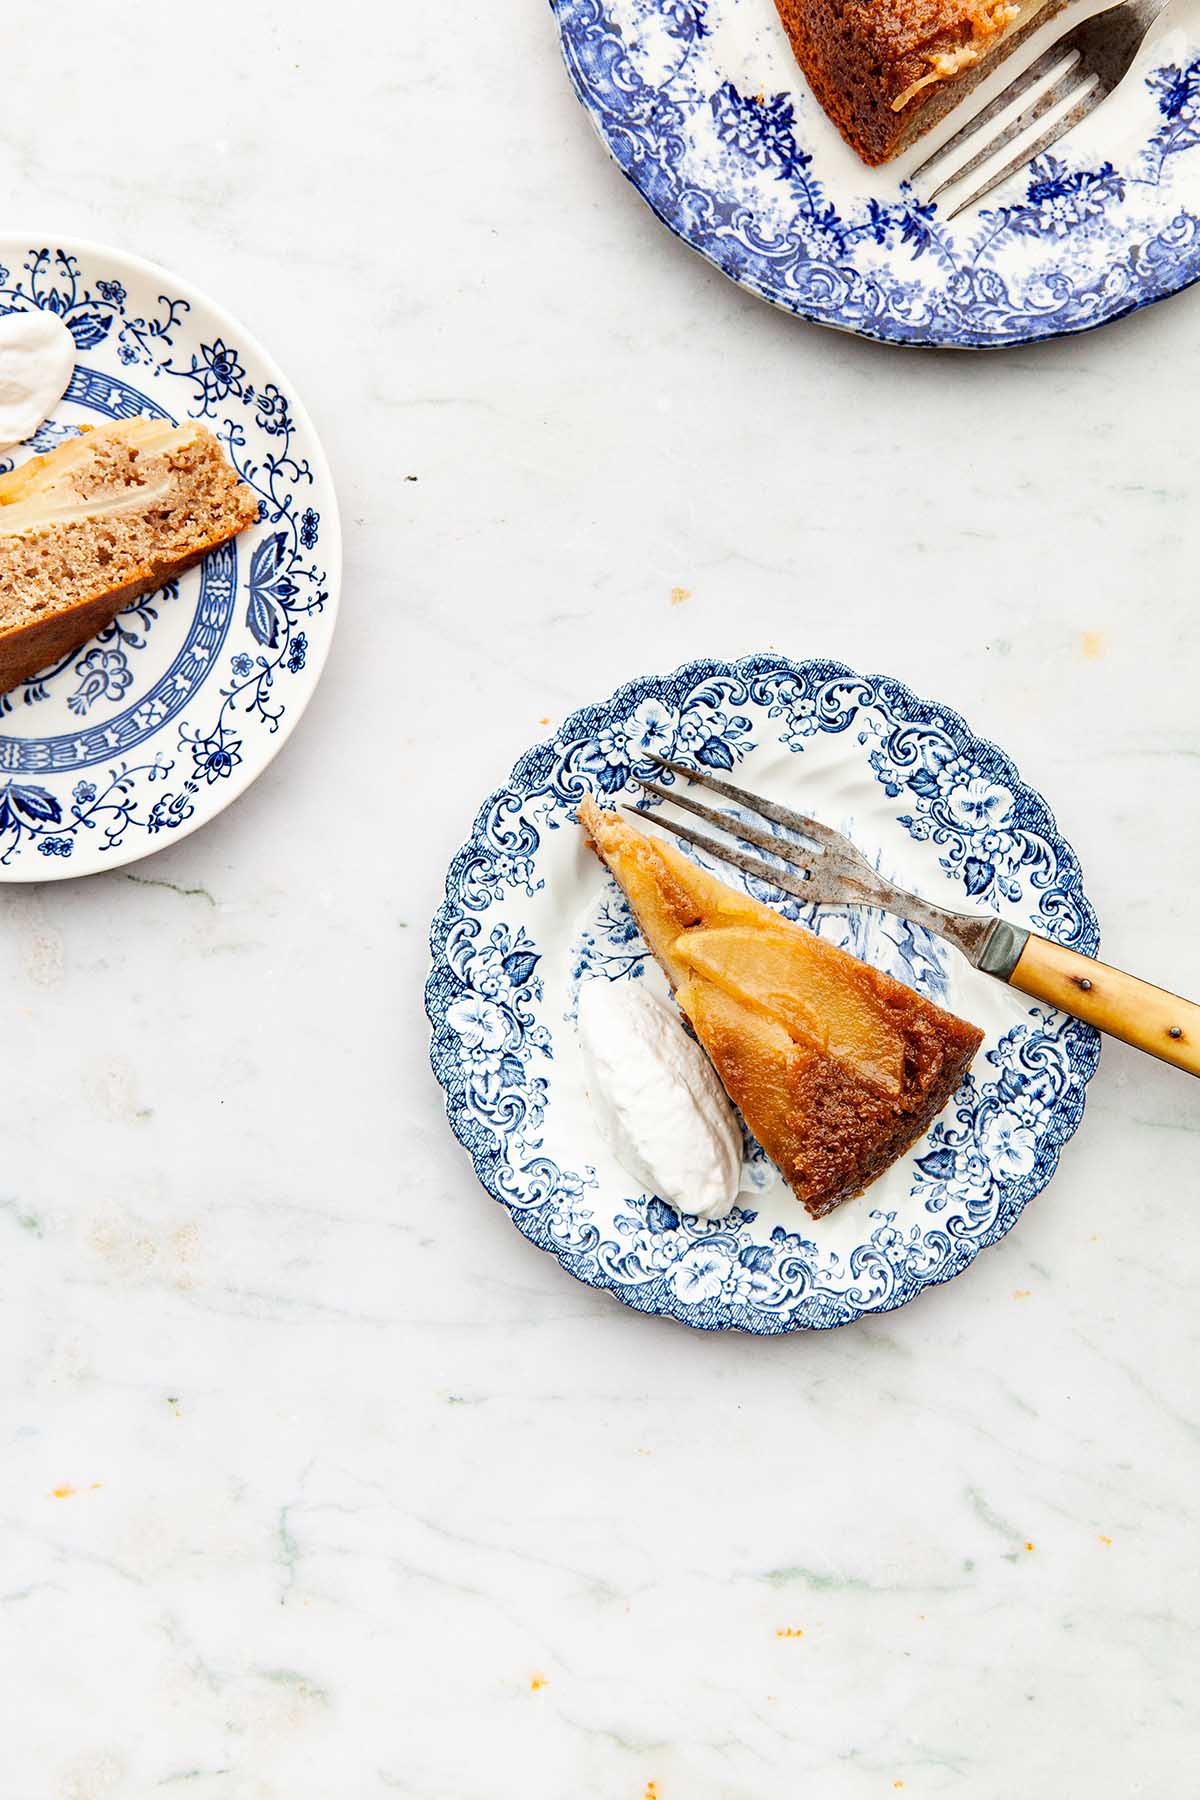 Overhead image of slices of chai cake on blue and white plates.